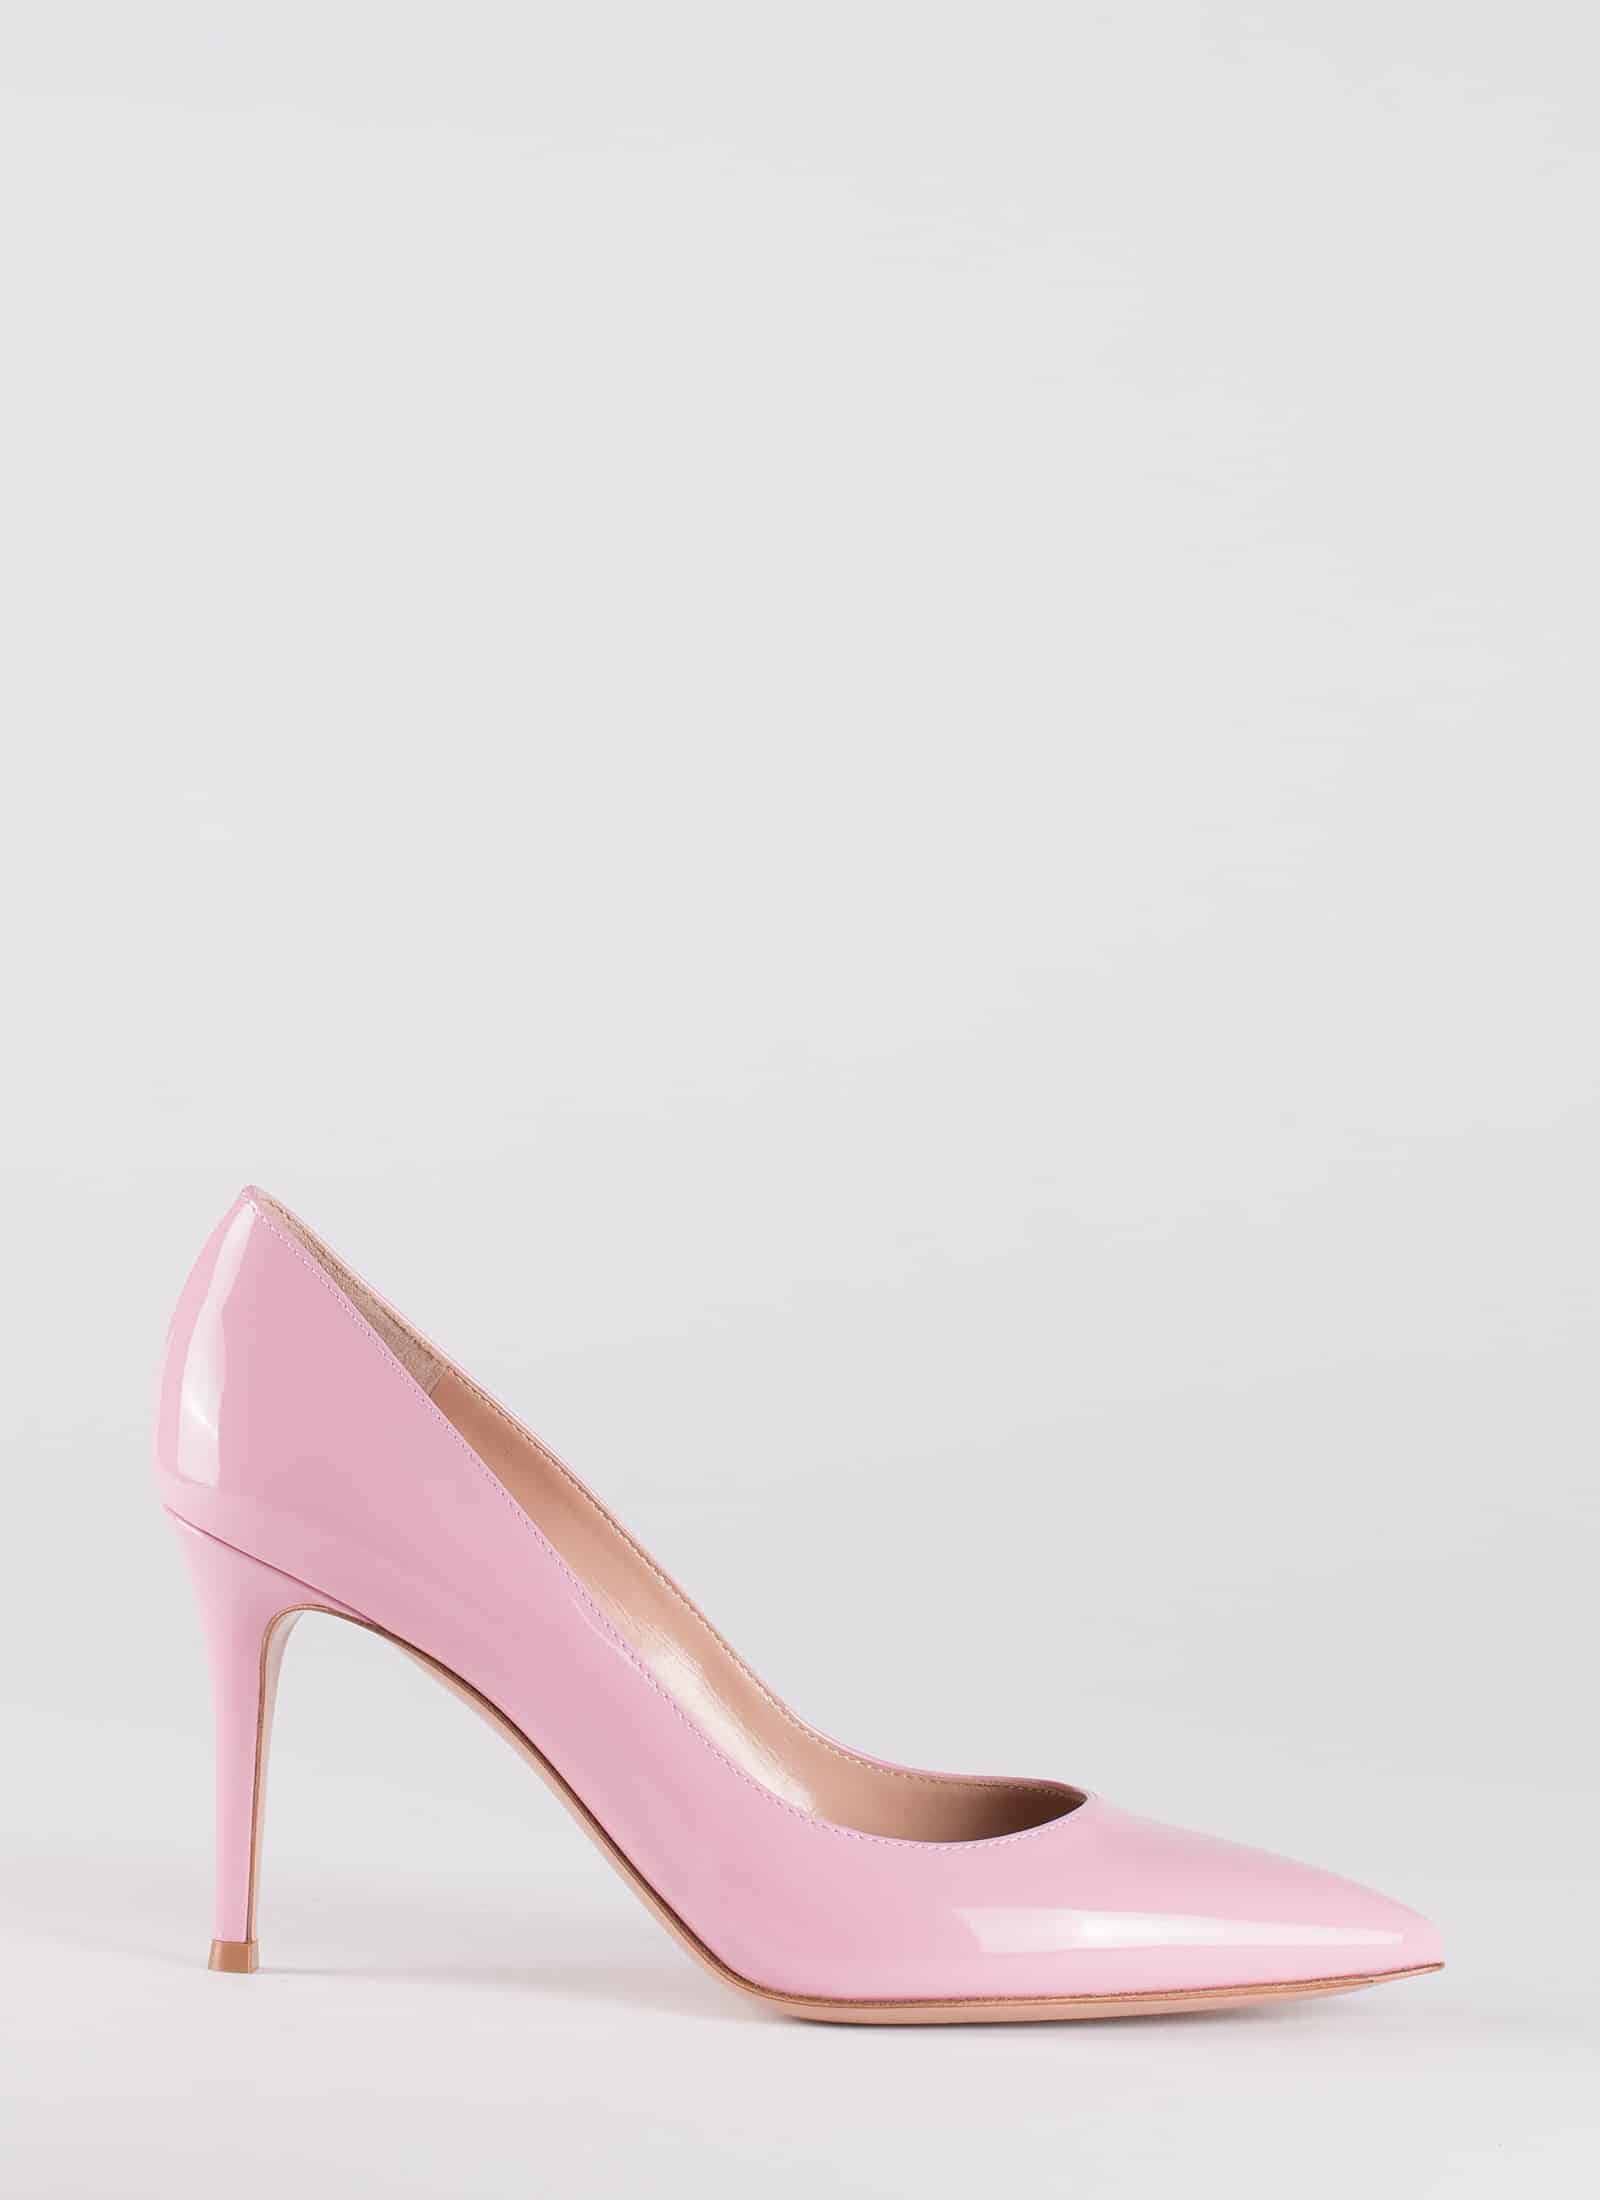 PATENT LEATHER SHOES - GIANVITO ROSSI